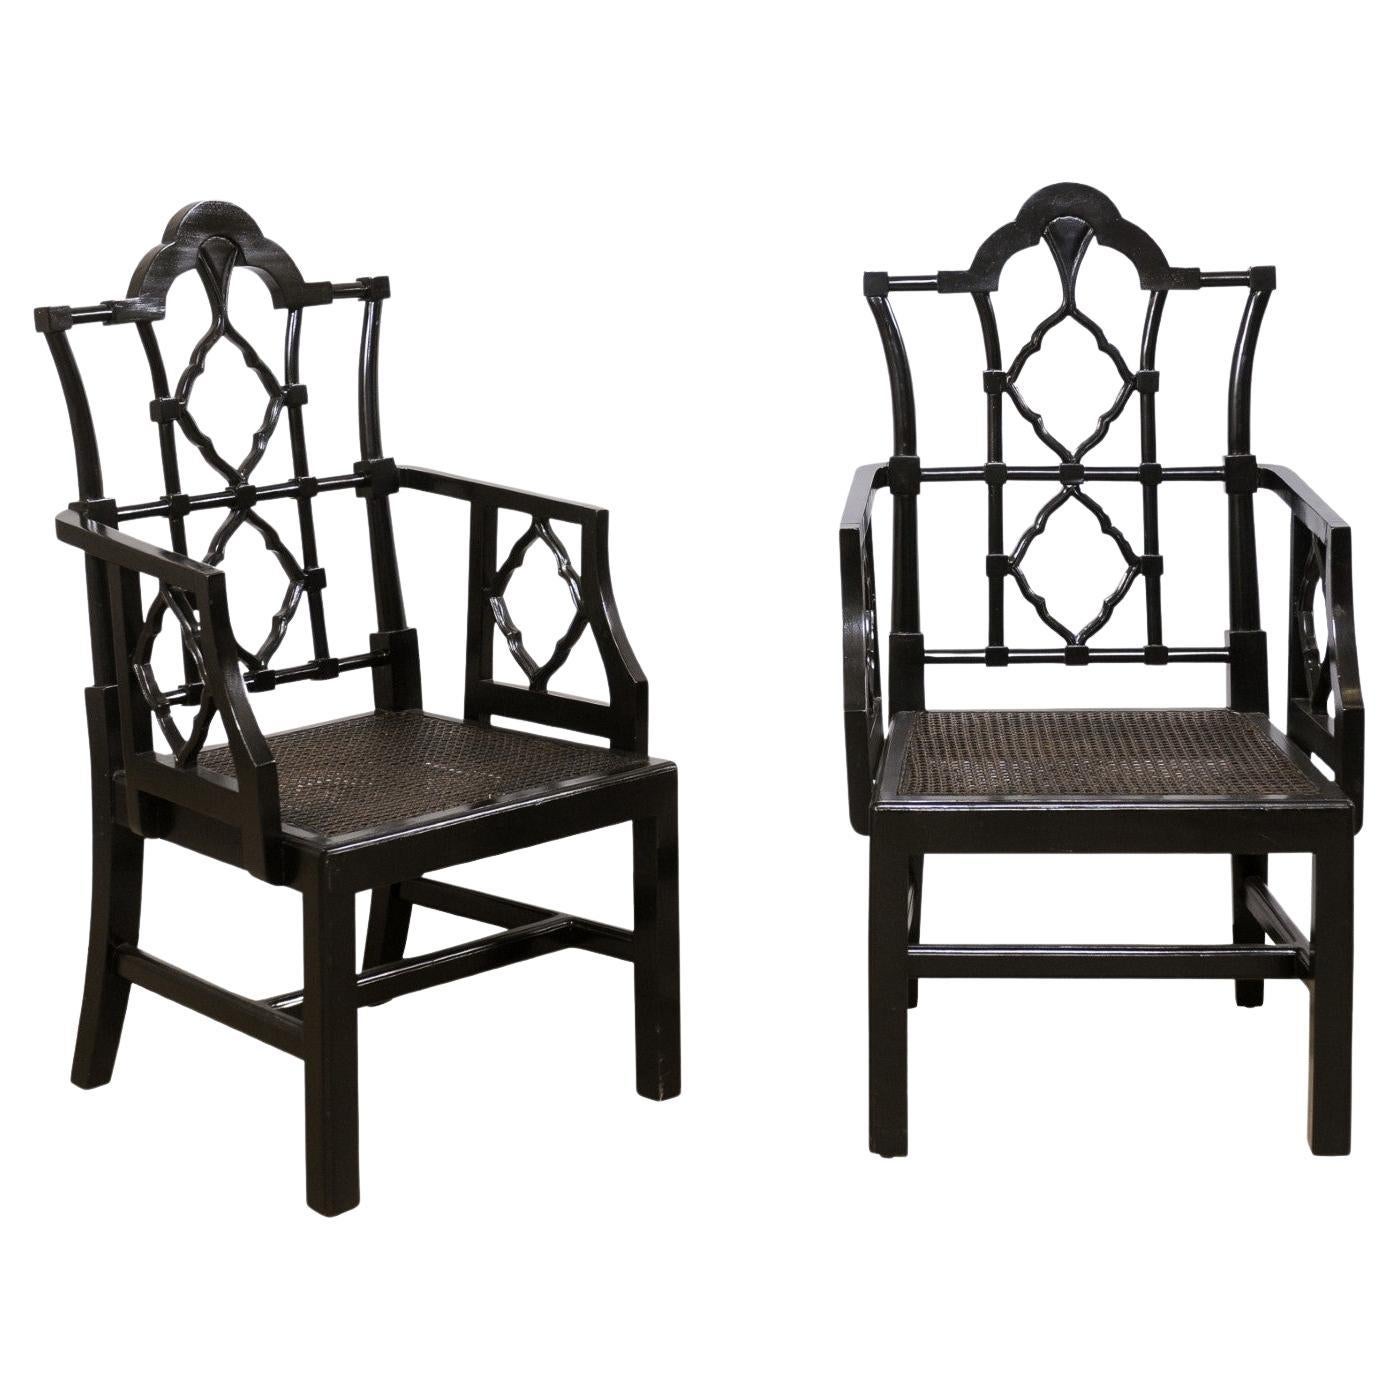 "Modern Chippendale" Style Wood Armchairs w/Lattice Back Design& Hand-Caned Seat